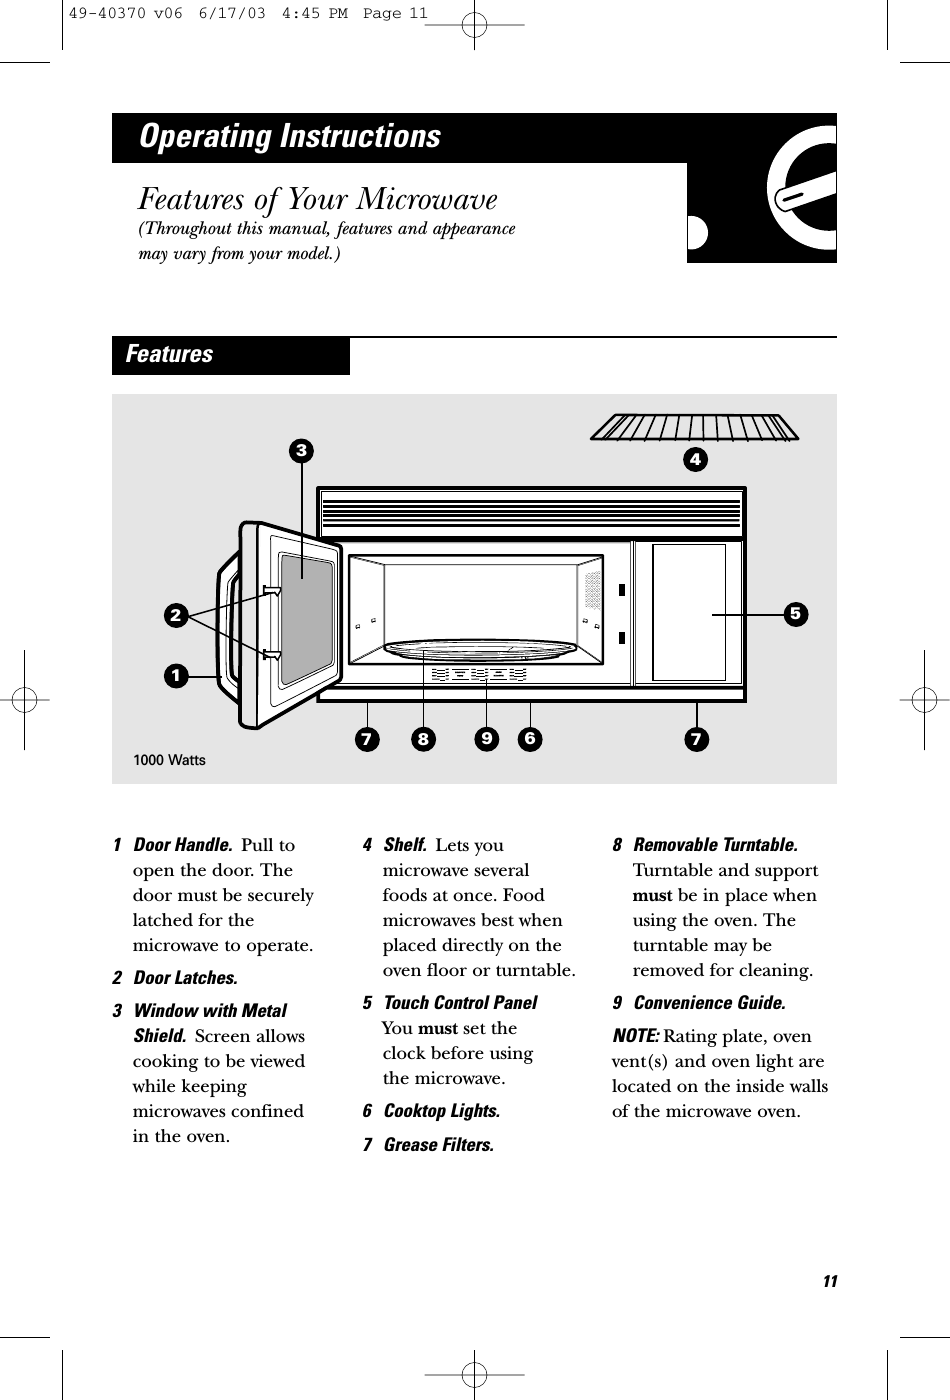 367987125Operating InstructionsFeatures of Your Microwave(Throughout this manual, features and appearancemay vary from your model.)1 Door Handle.  Pull toopen the door. Thedoor must be securelylatched for themicrowave to operate.2 Door Latches.3 Window with MetalShield.  Screen allowscooking to be viewedwhile keepingmicrowaves confined in the oven.4 Shelf.  Lets youmicrowave several foods at once. Foodmicrowaves best whenplaced directly on theoven floor or turntable. 5 Touch Control Panel You must set the clock before using the microwave. 6 Cooktop Lights.7 Grease Filters.8 Removable Turntable.Turntable and supportmust be in place whenusing the oven. Theturntable may beremoved for cleaning.9 Convenience Guide.NOTE: Rating plate, ovenvent(s) and oven light arelocated on the inside wallsof the microwave oven.Features1141000 Watts49-40370 v06  6/17/03  4:45 PM  Page 11